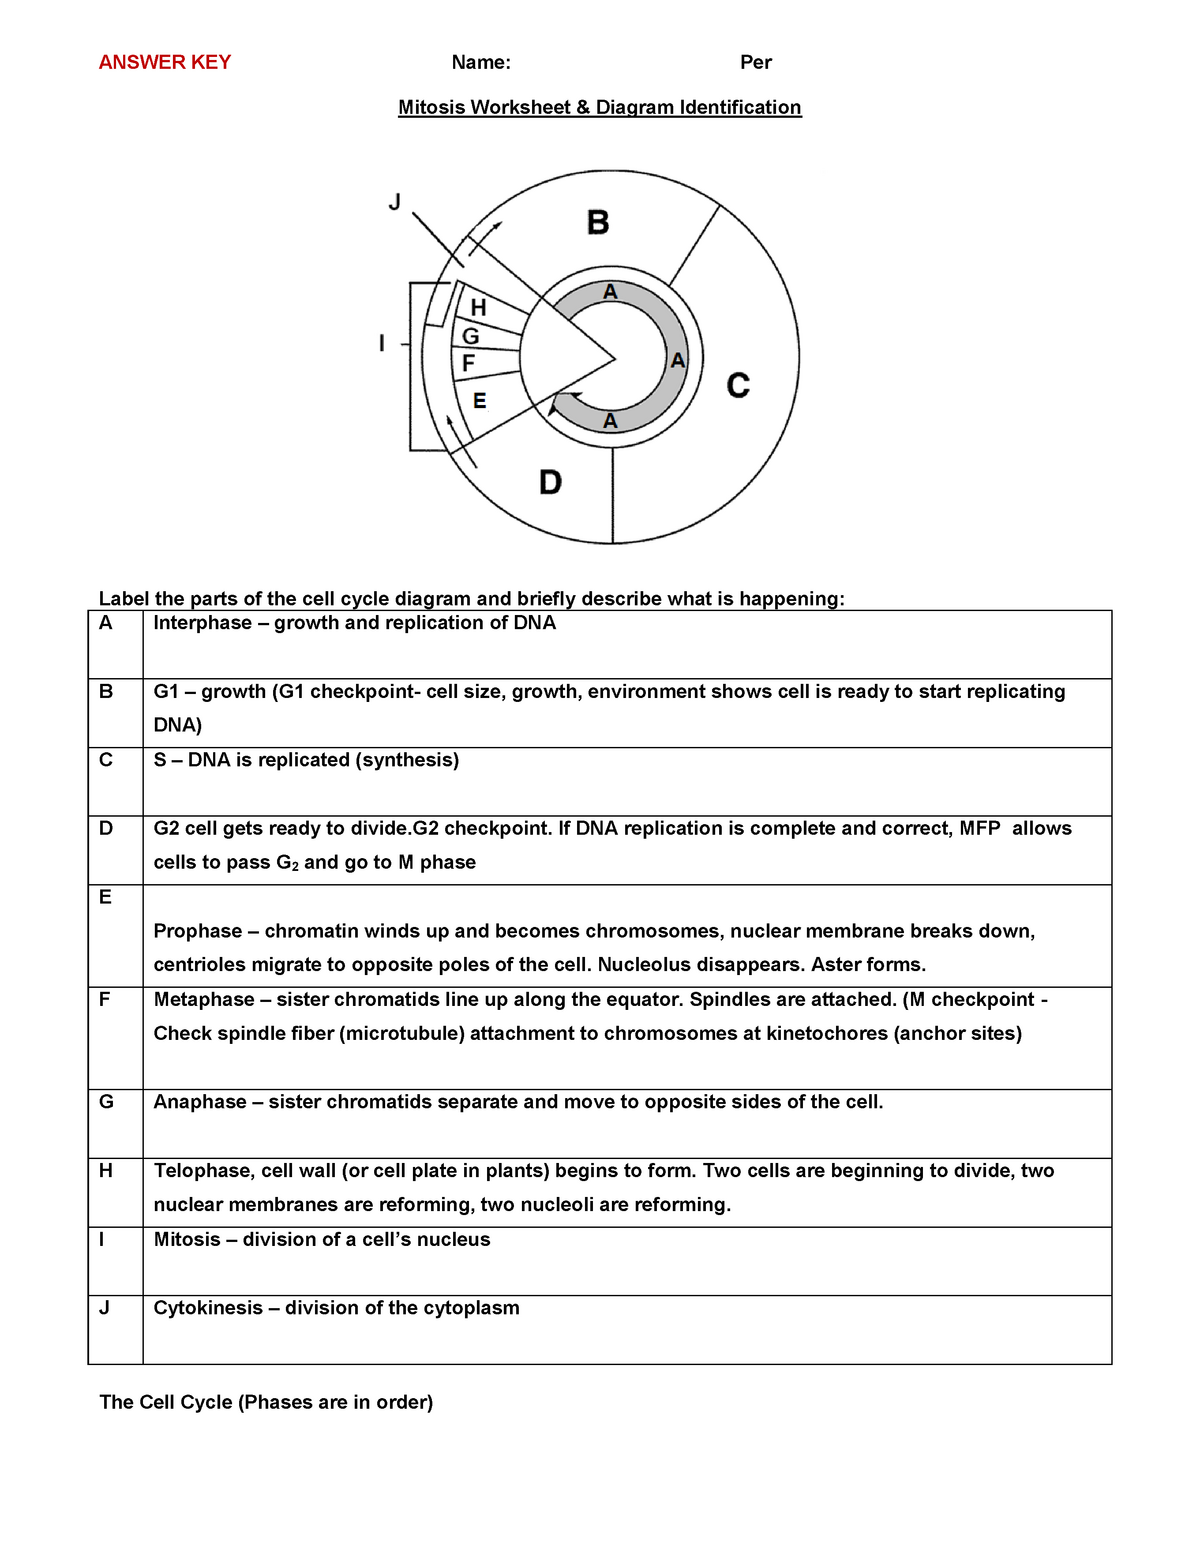 Mitosis Worksheet KEY njkelwbqfgklberivlbiqt;bguietabnv;aenvje Within Cell Division Worksheet Answers